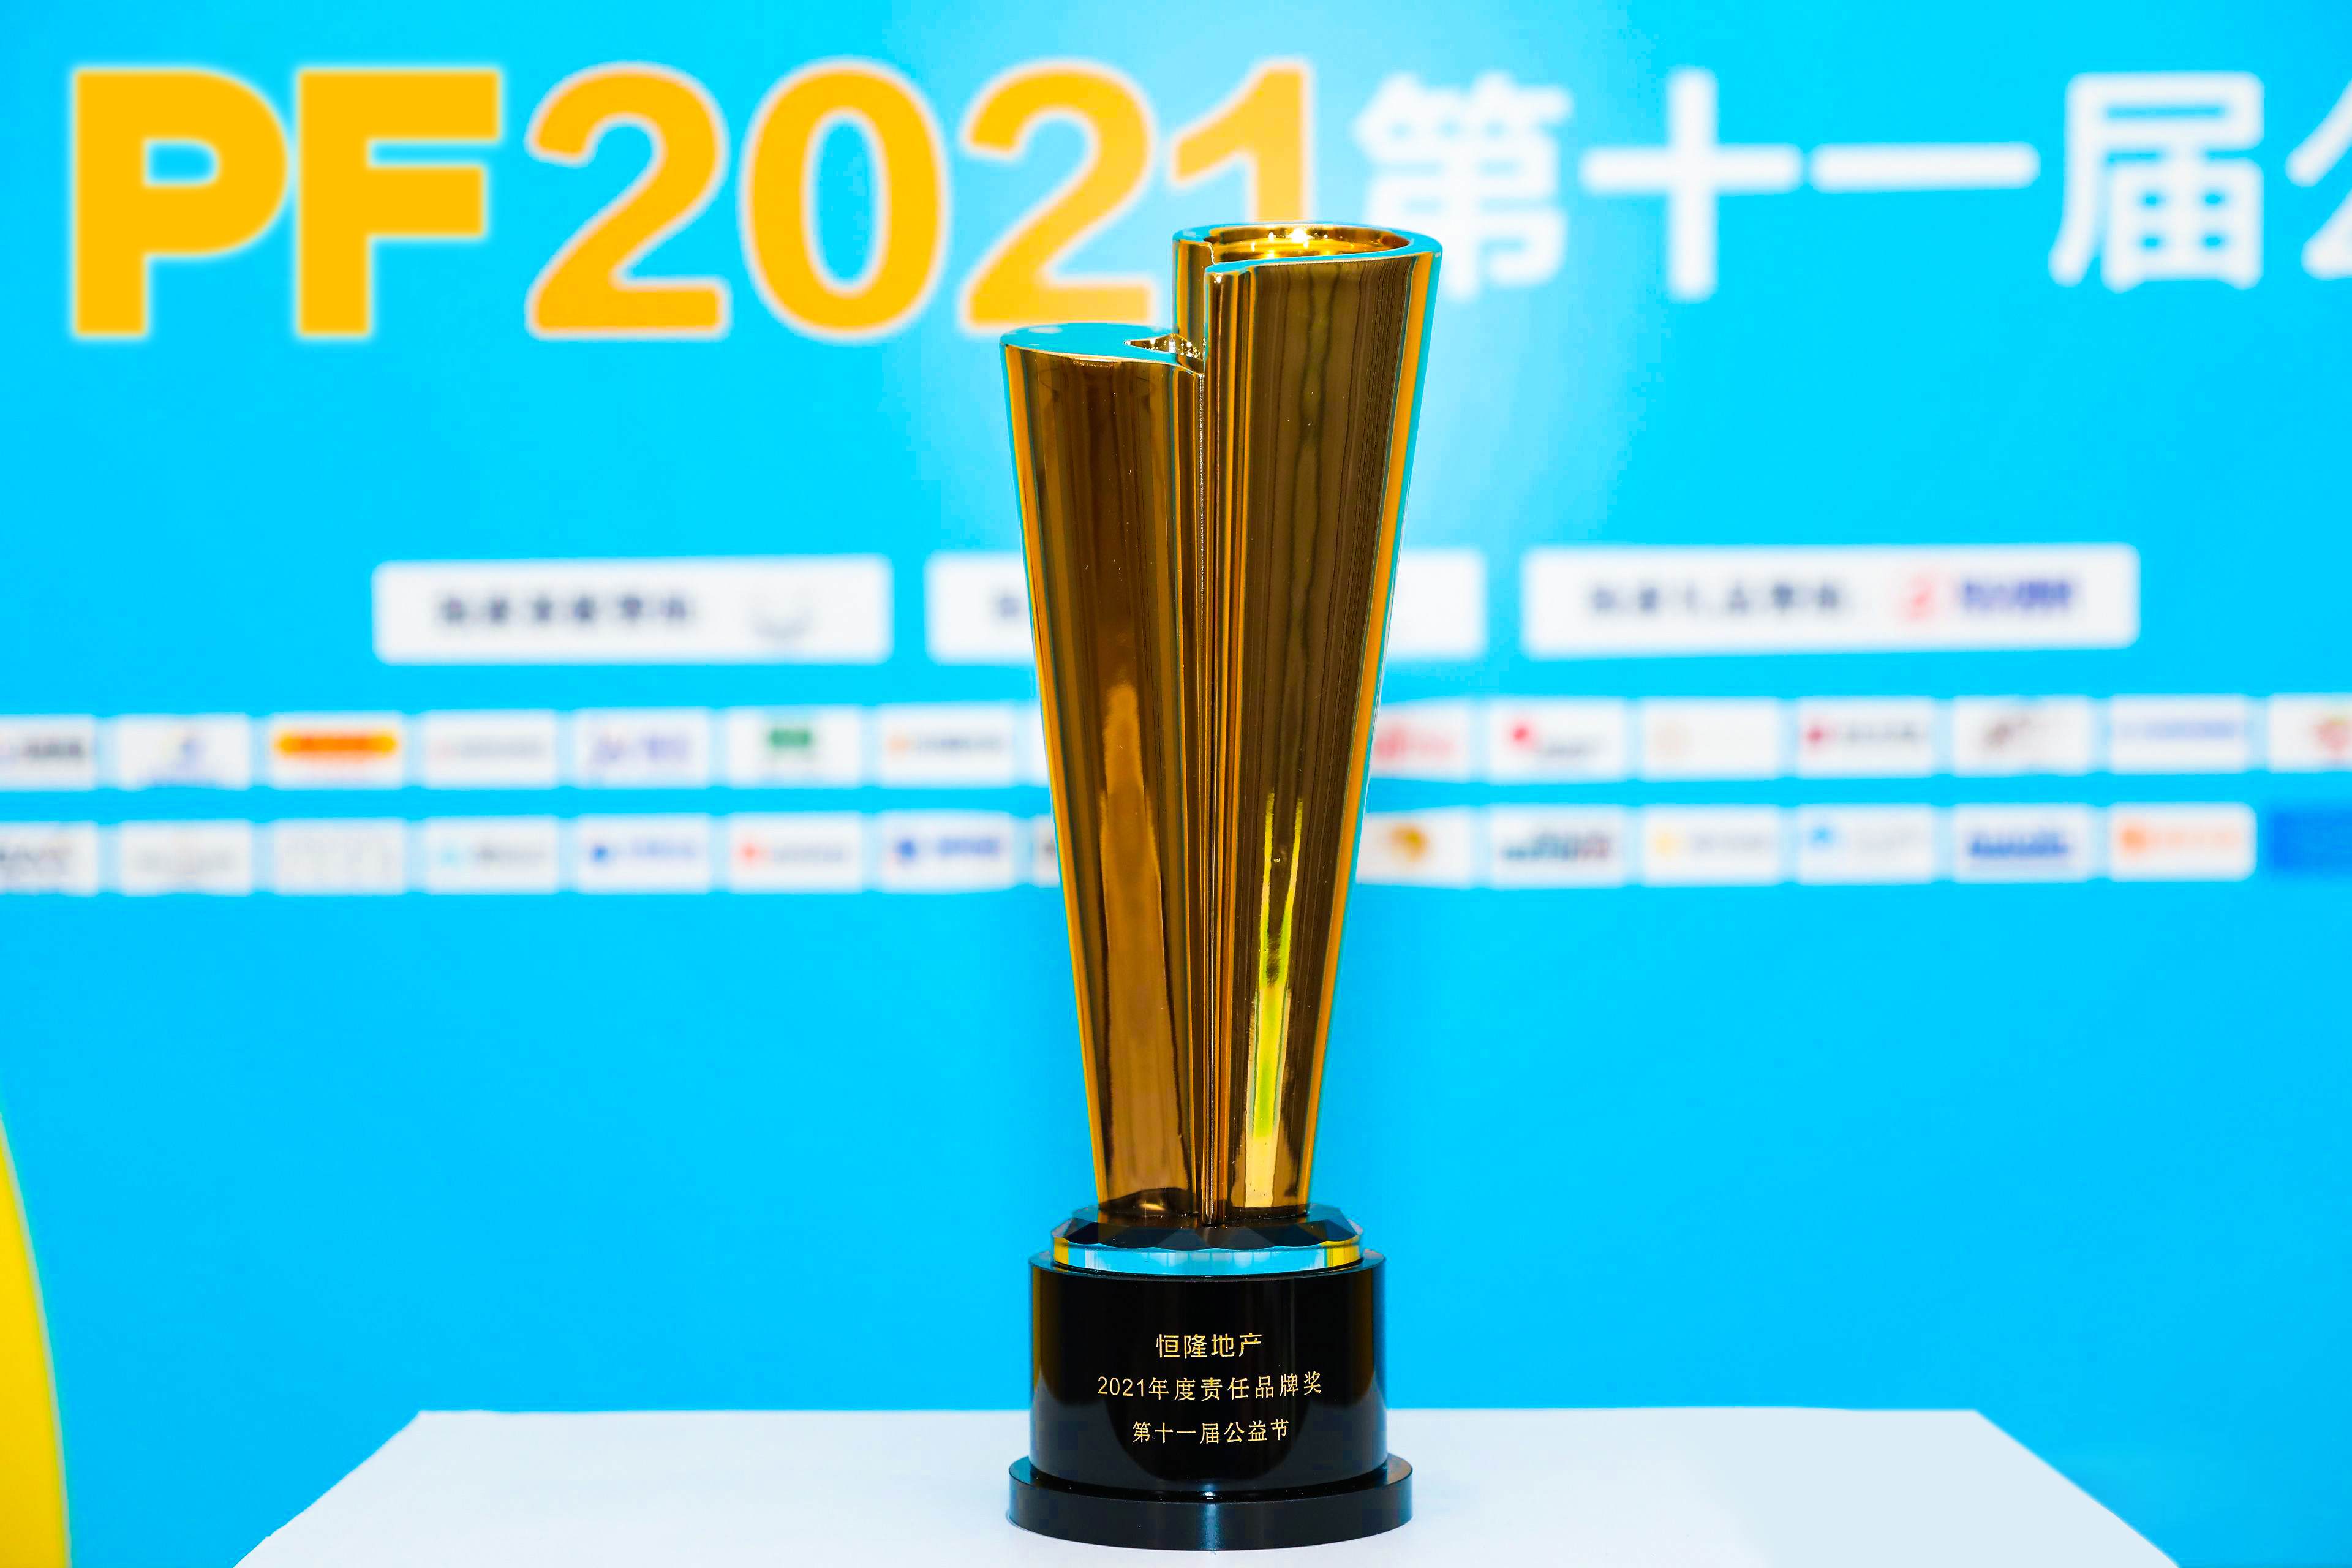 Hang Lung clinches the 2021 Responsible Brand Award at the 11th China Charity Festival